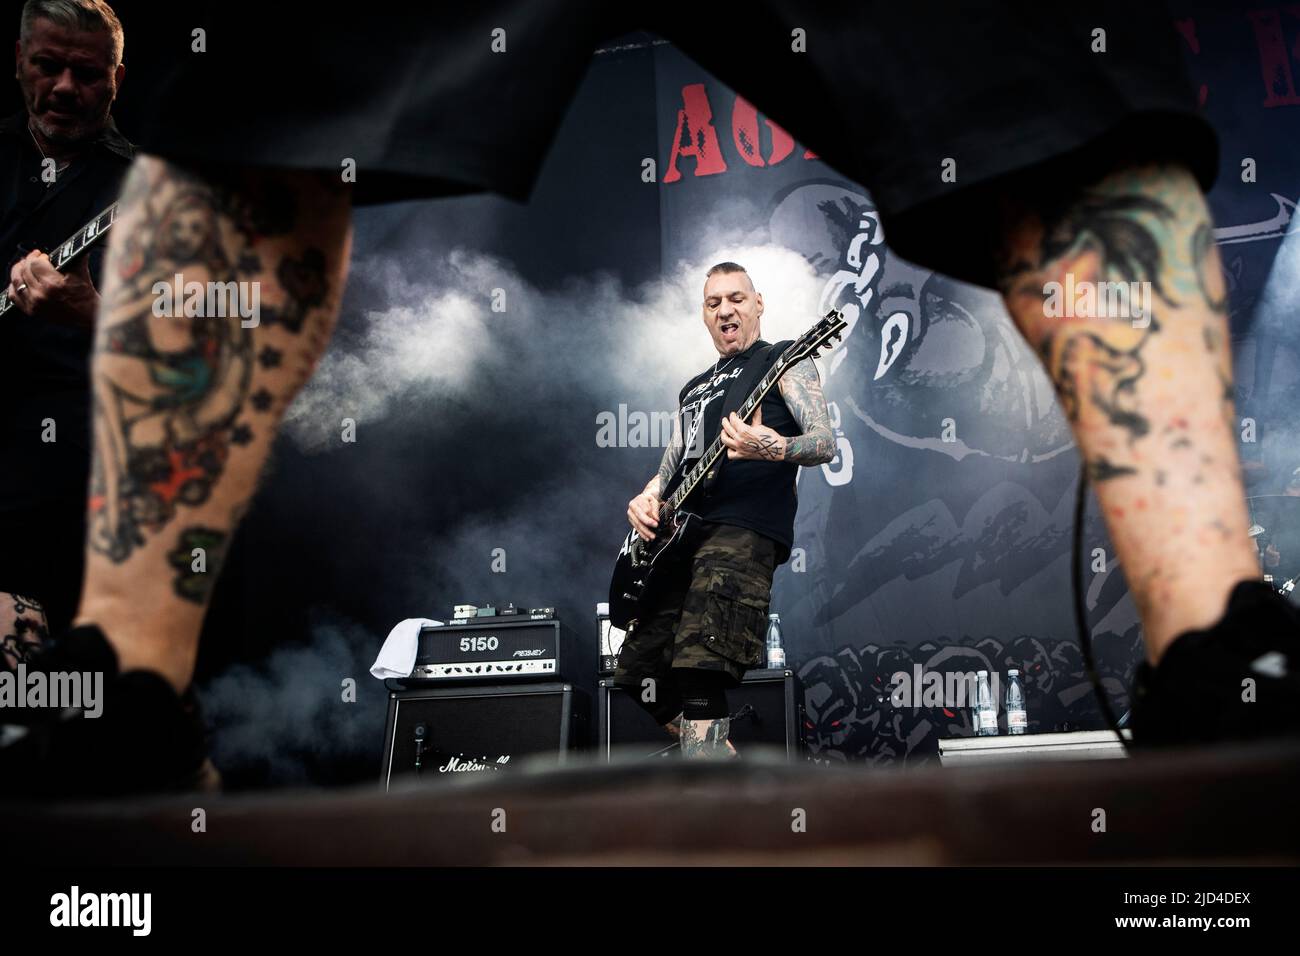 Copenhagen, Denmark. 17th June, 2022. The American hardcore punk band Agnostic Front performs a live concert during the Danish heavy metal festival Copenhell 2022 in Copenhagen. Here guitarist Vinnie Stigma is seen live on stage. (Photo Credit: Gonzales Photo/Alamy Live News Stock Photo